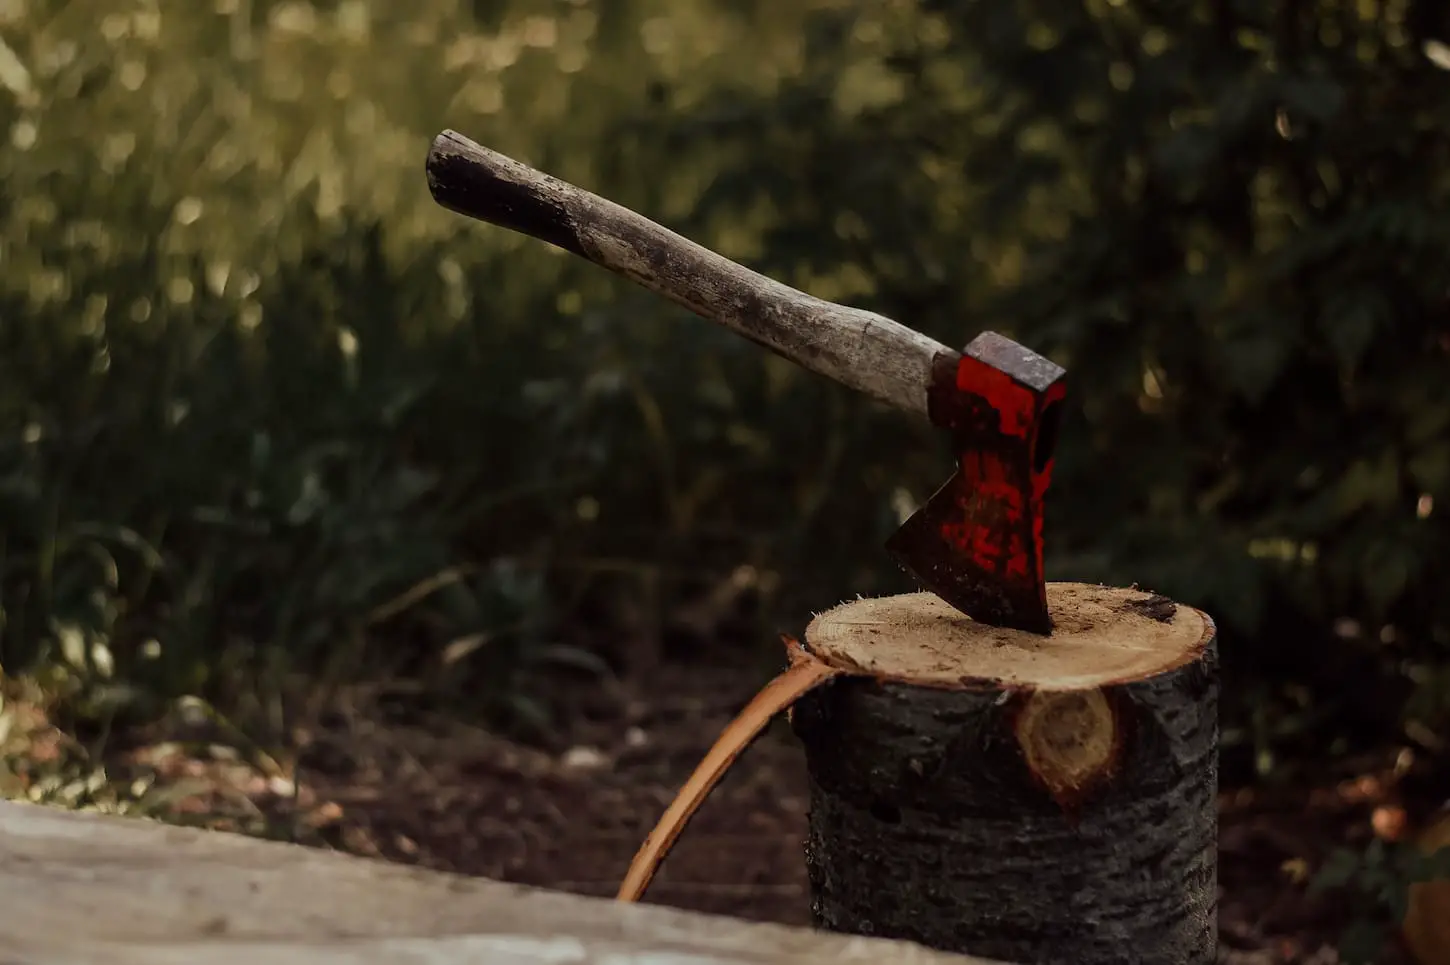 An image of an axe in the stump.